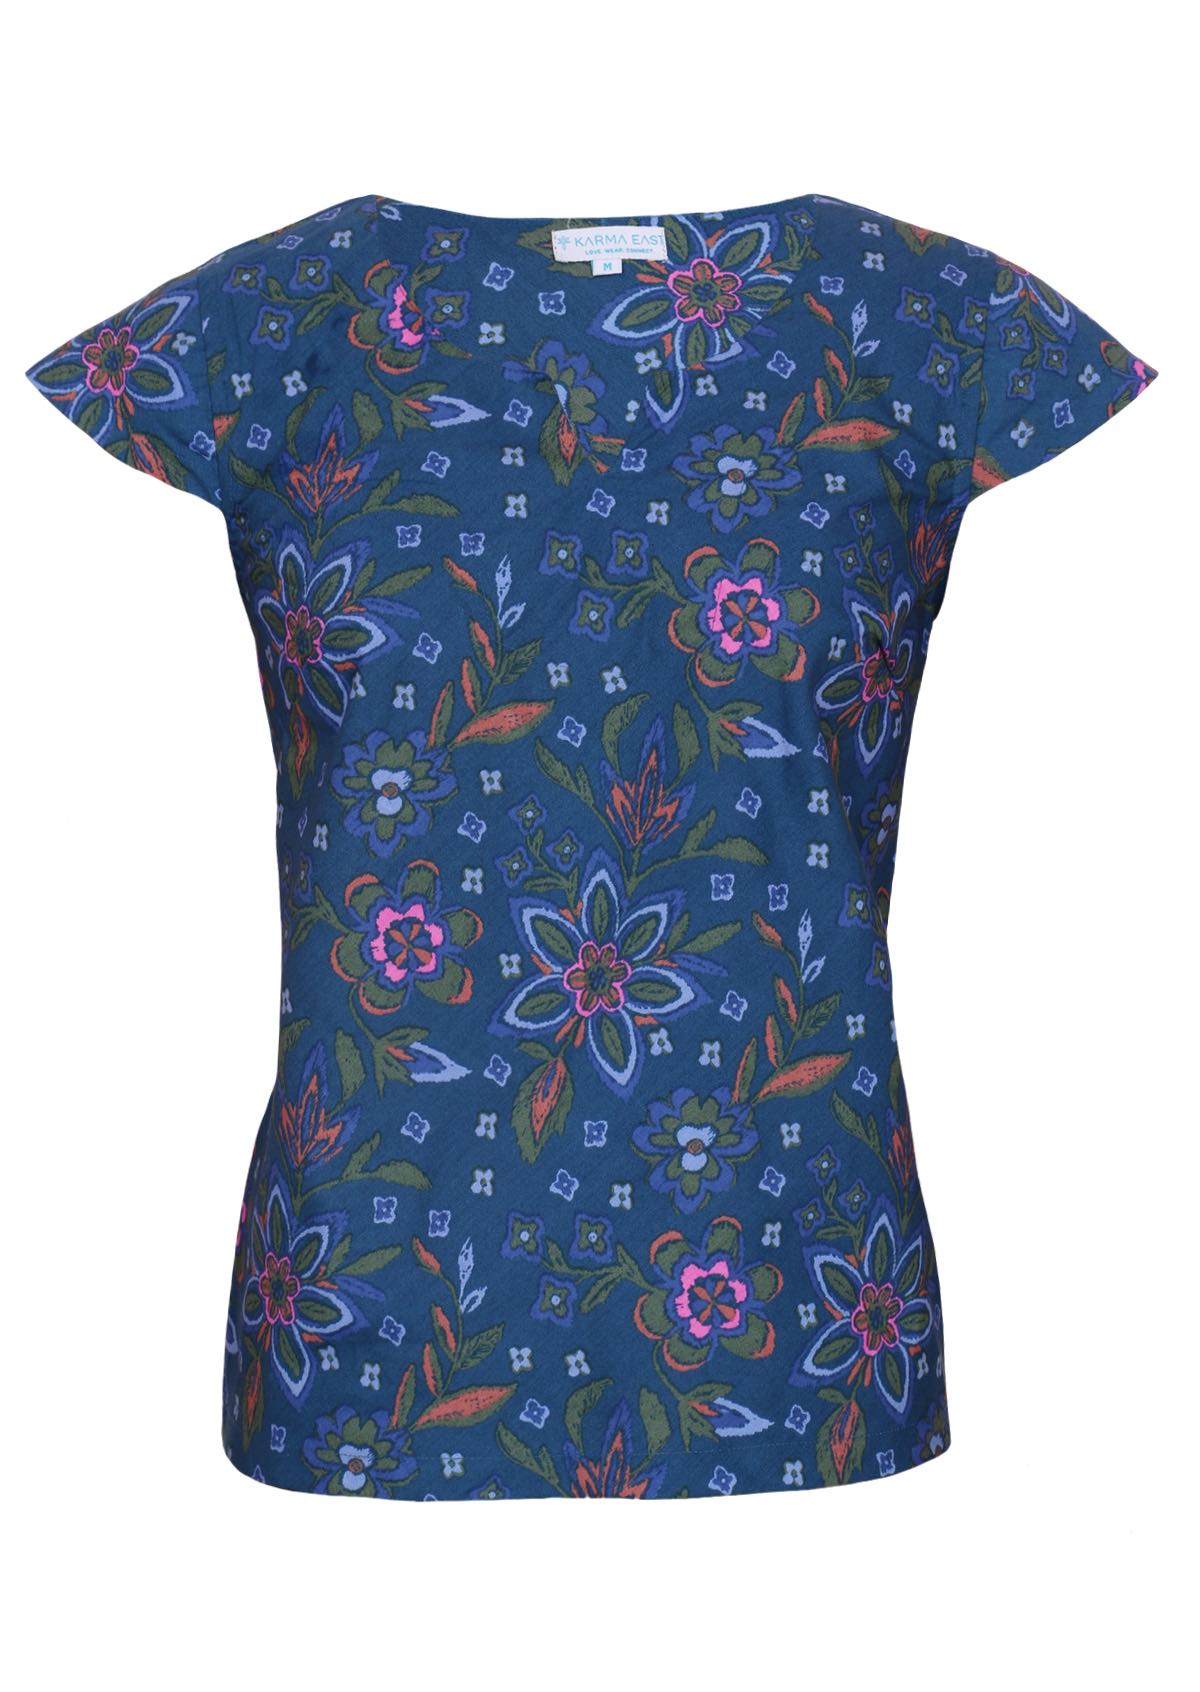 Green, orange and pink florals are on a 100% cotton blue base top. 